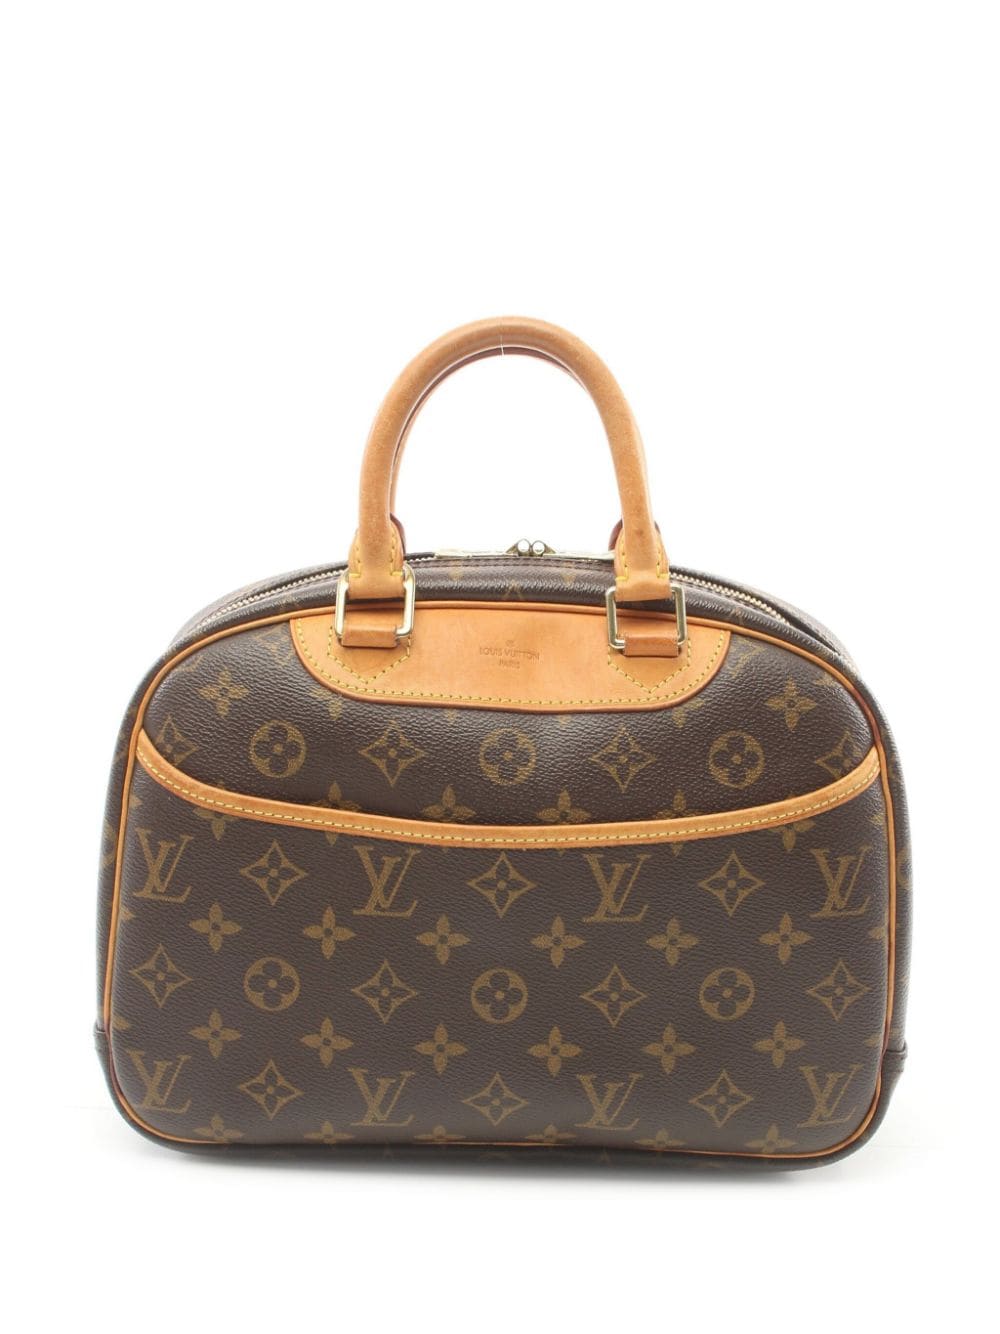 Pre-owned Louis Vuitton 2004 Trouville Handbag In Brown